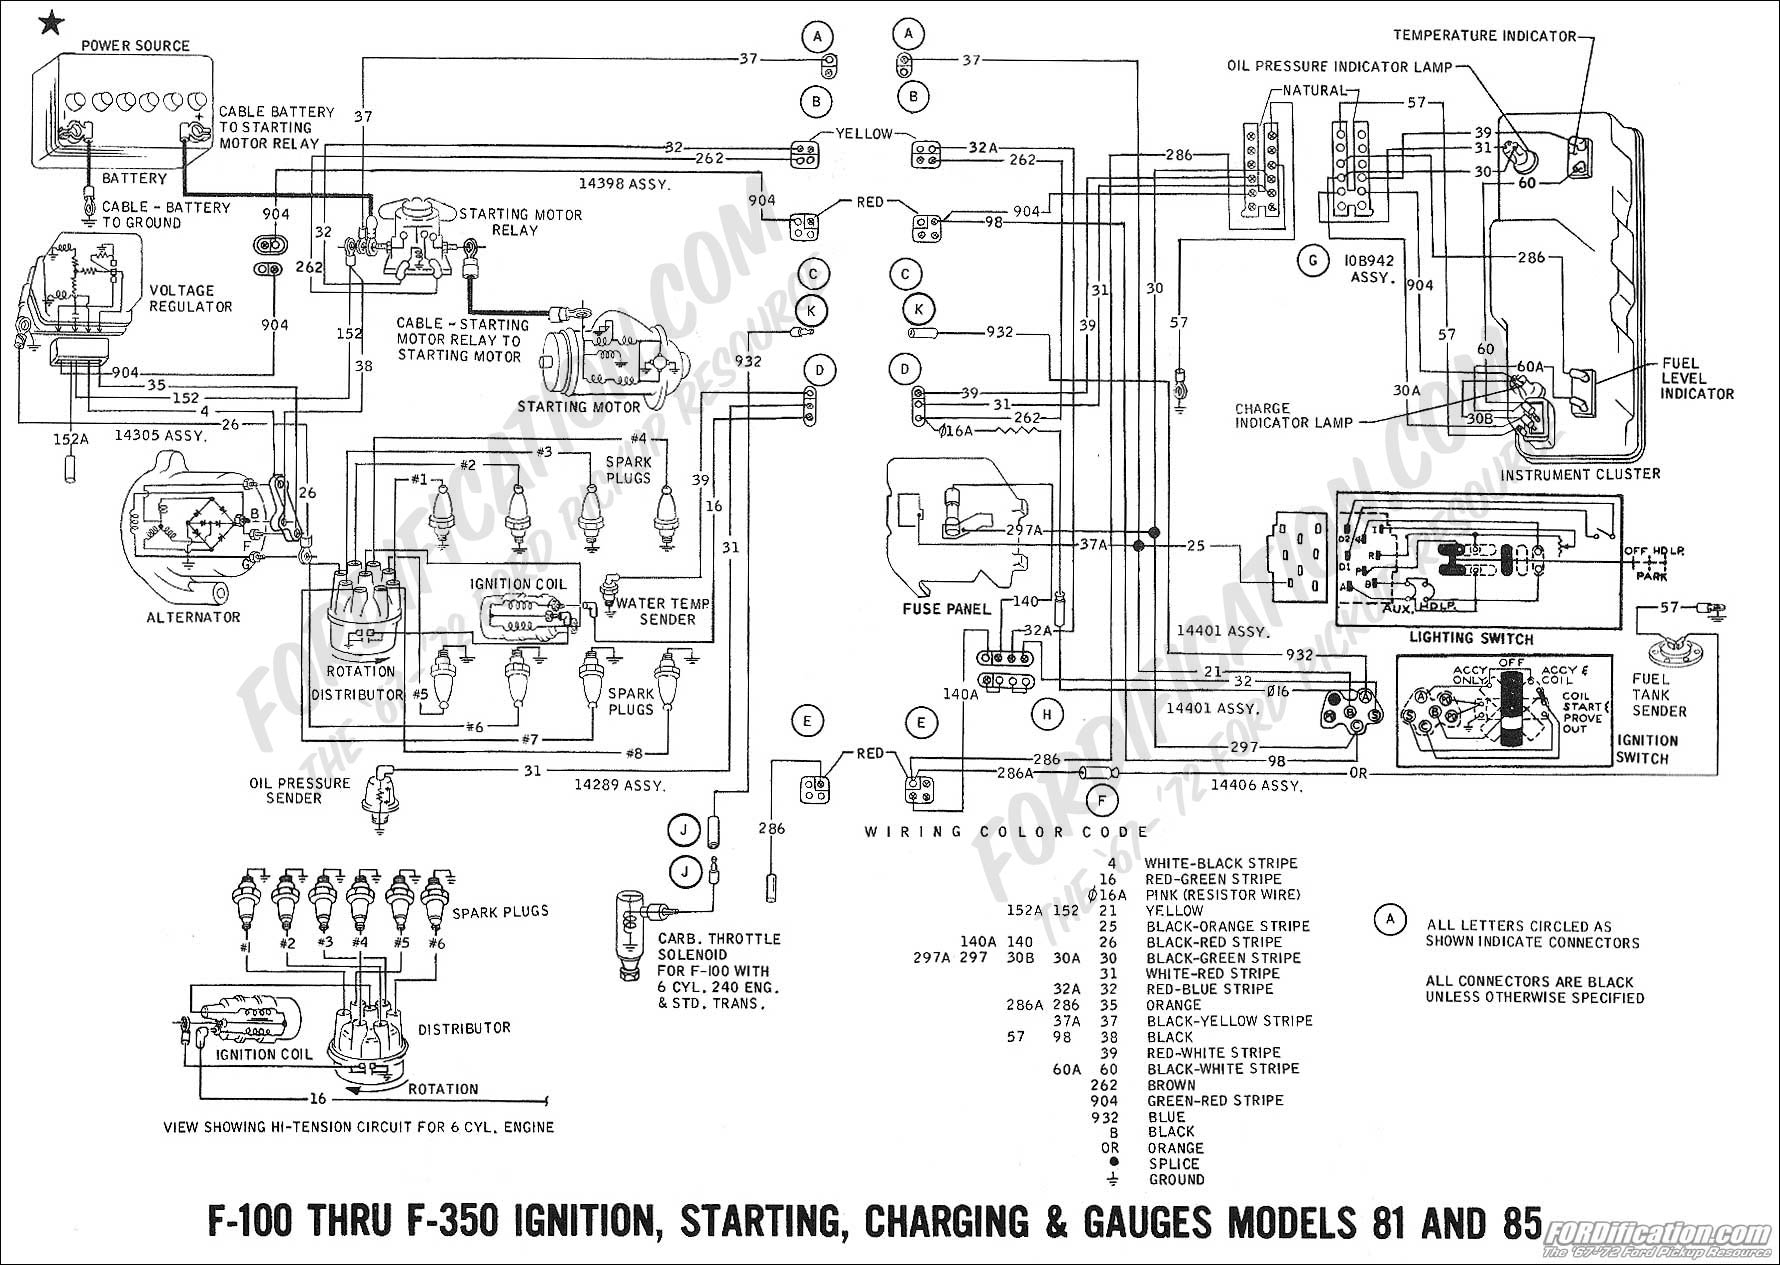 Ford Galaxie Cluster Wiring Diagram | Manual E-Books - Ford Wiring Diagram